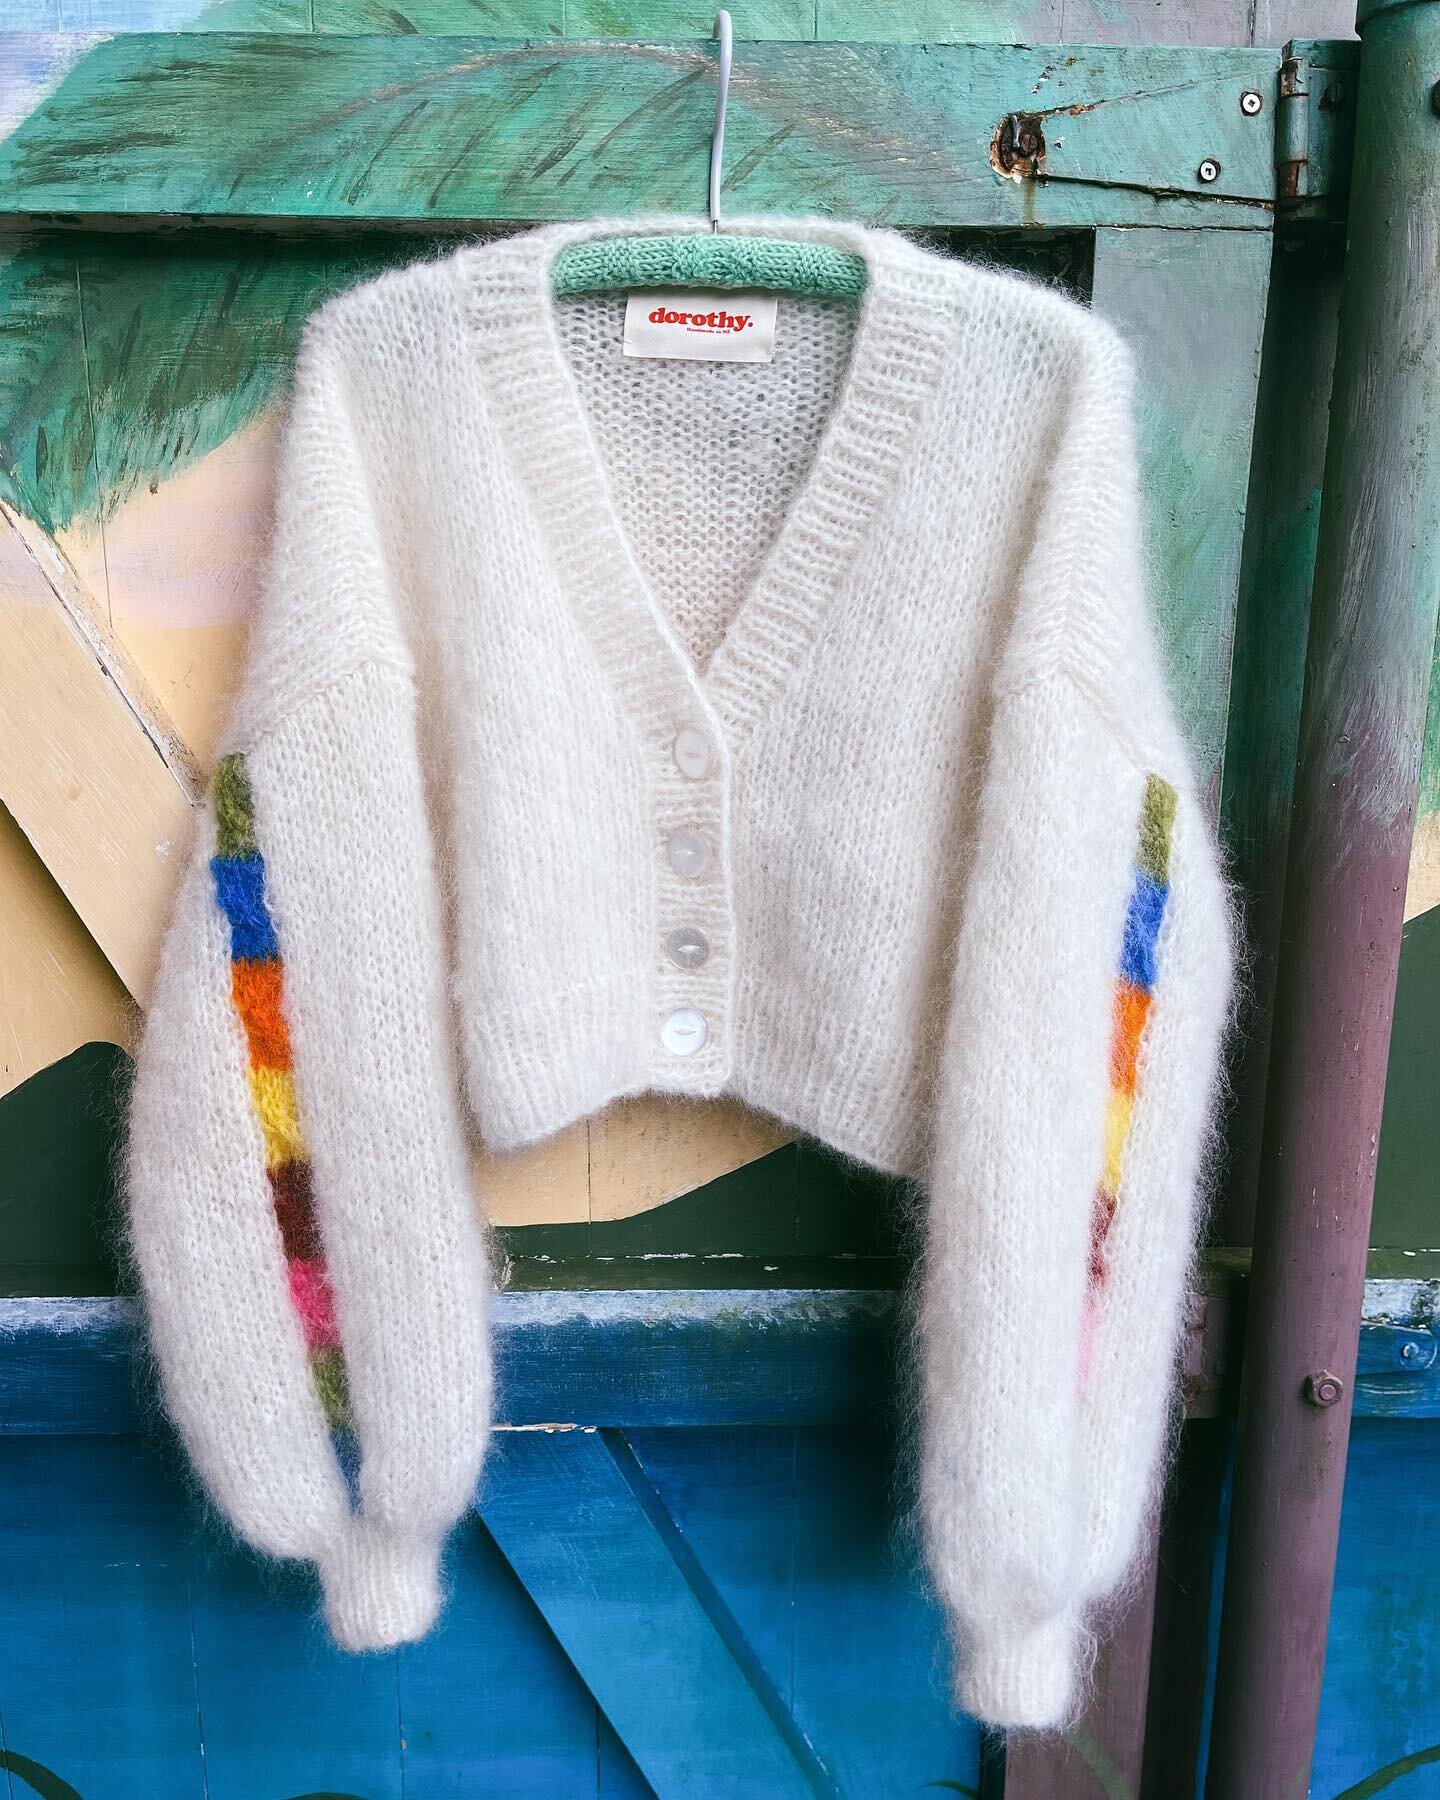 We&rsquo;ve had a couple of custom order slots come available. 🌈 Hand knit in Aotearoa, a jumper made just for you.

How to order a custom Dorothy:

1&bull; Screenshot all your favourite Dorothys - your final knit can mix and match from different de